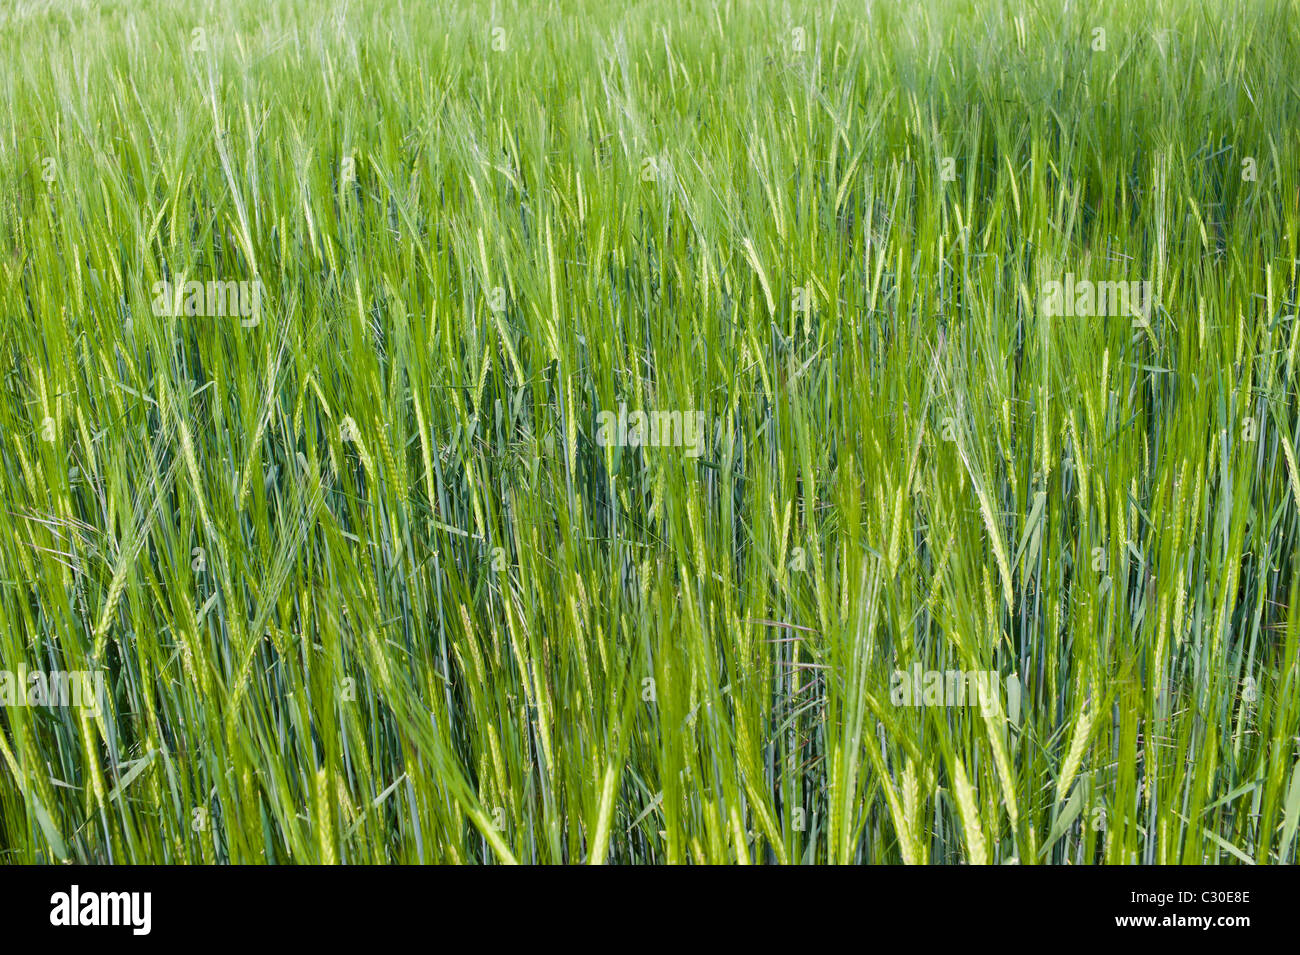 Unripe barley crop grows at Asthall, The Cotswolds, Oxfordshire, UK Stock Photo